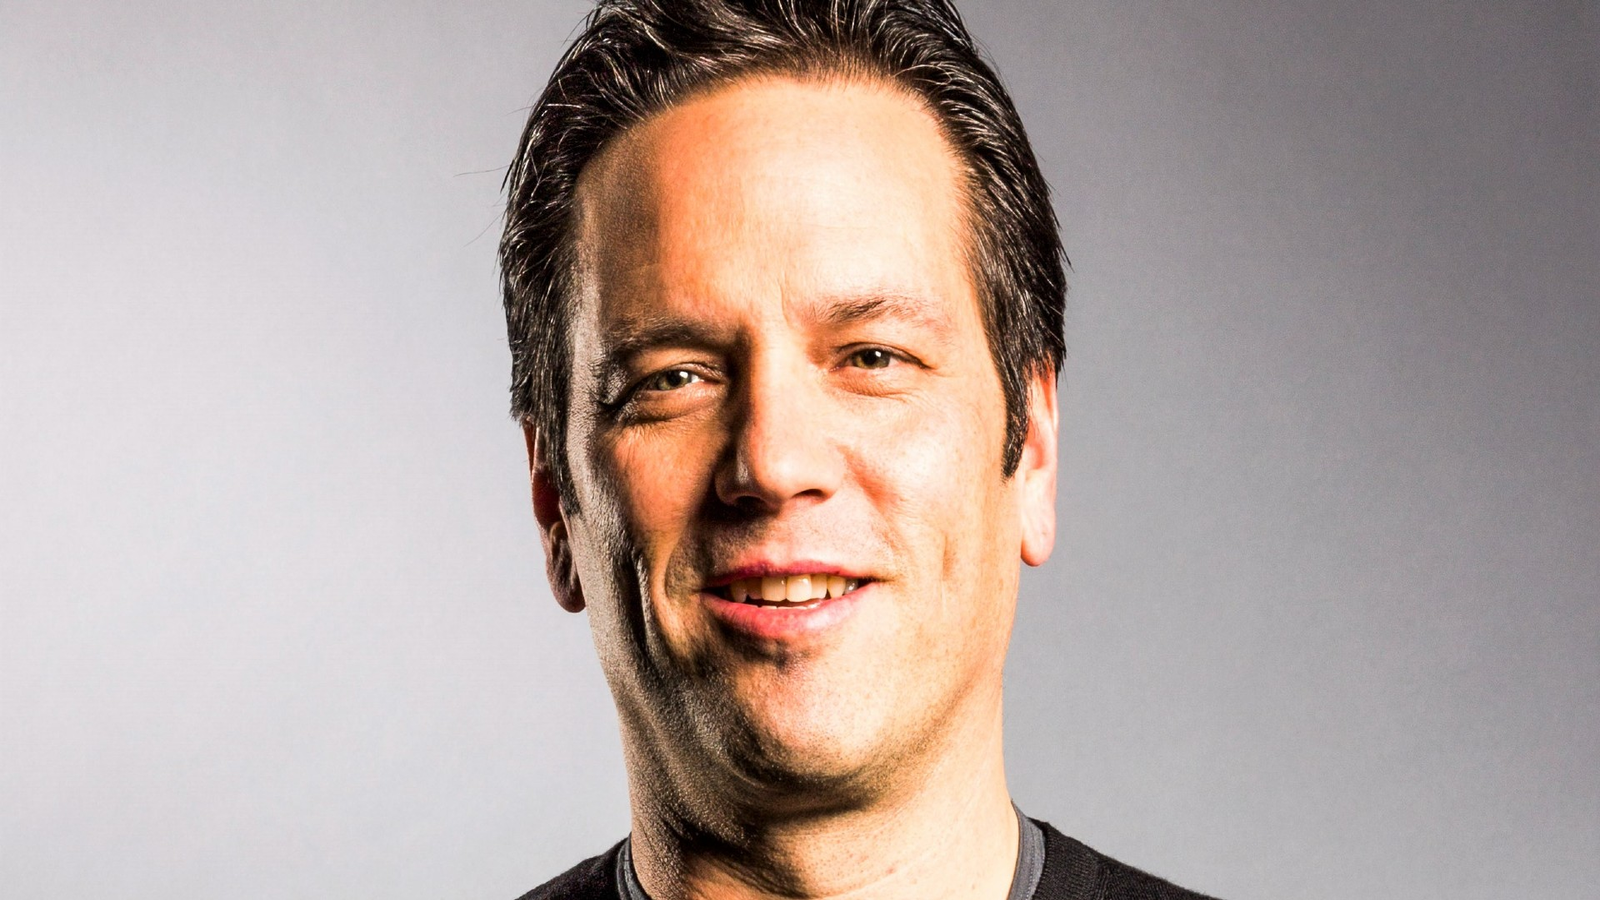 Xbox chief Phil Spencer promoted to Microsoft leadership group